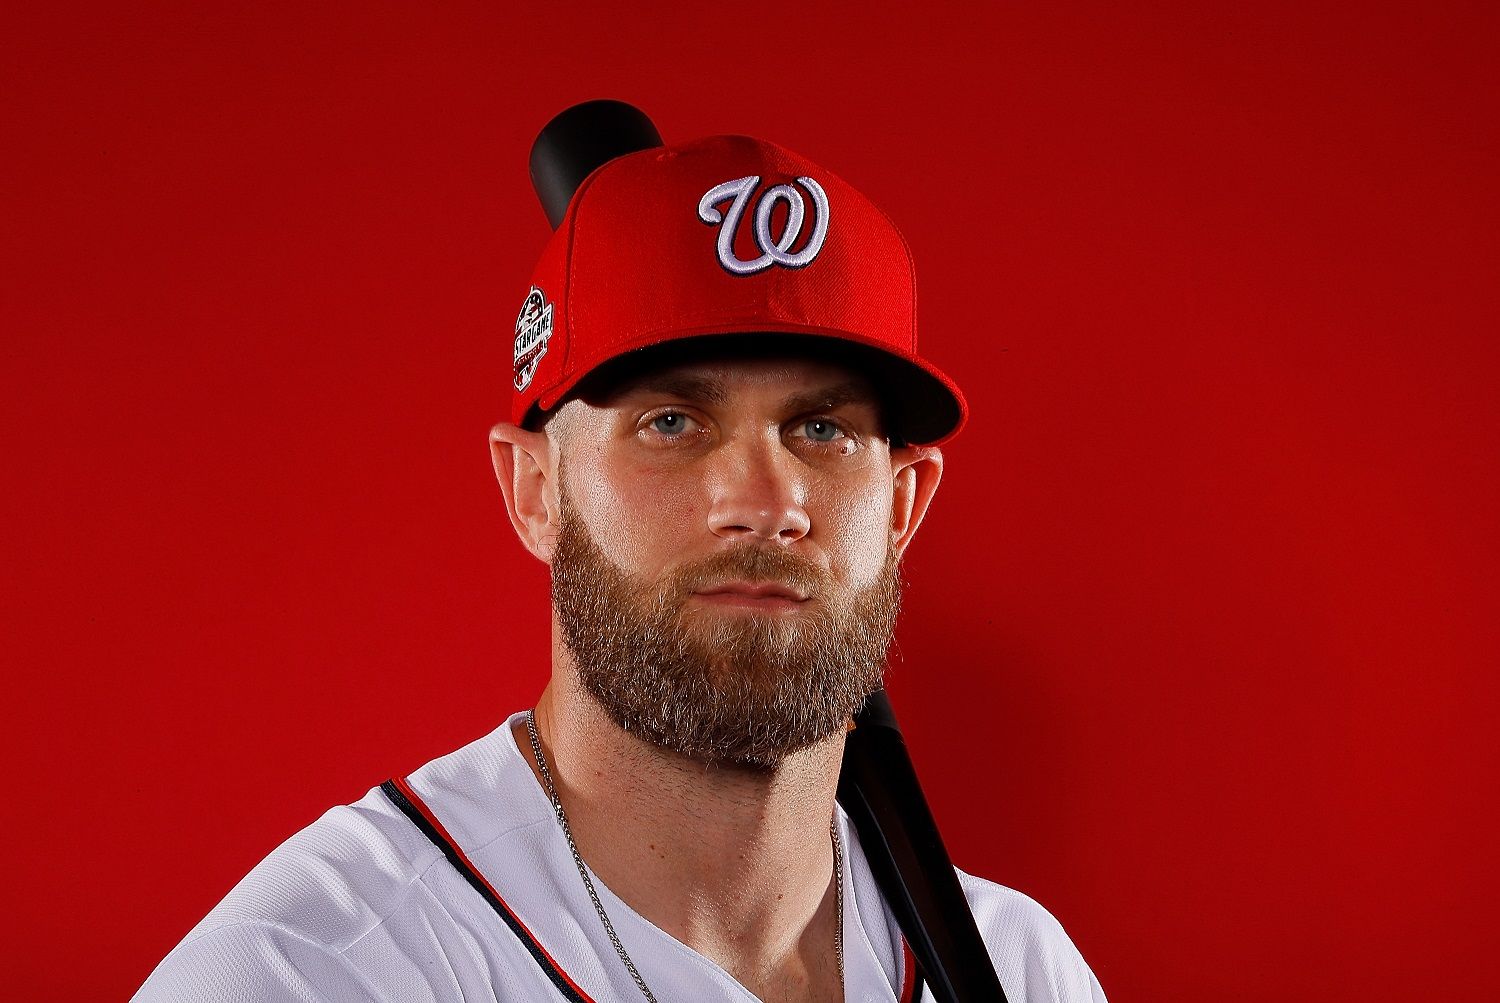 WEST PALM BEACH, FL - FEBRUARY 22:  Bryce Harper #34 of the Washington Nationals poses for a photo during photo days at The Ballpark of the Palm Beaches on February 22, 2018 in West Palm Beach, Florida.  (Photo by Kevin C. Cox/Getty Images)